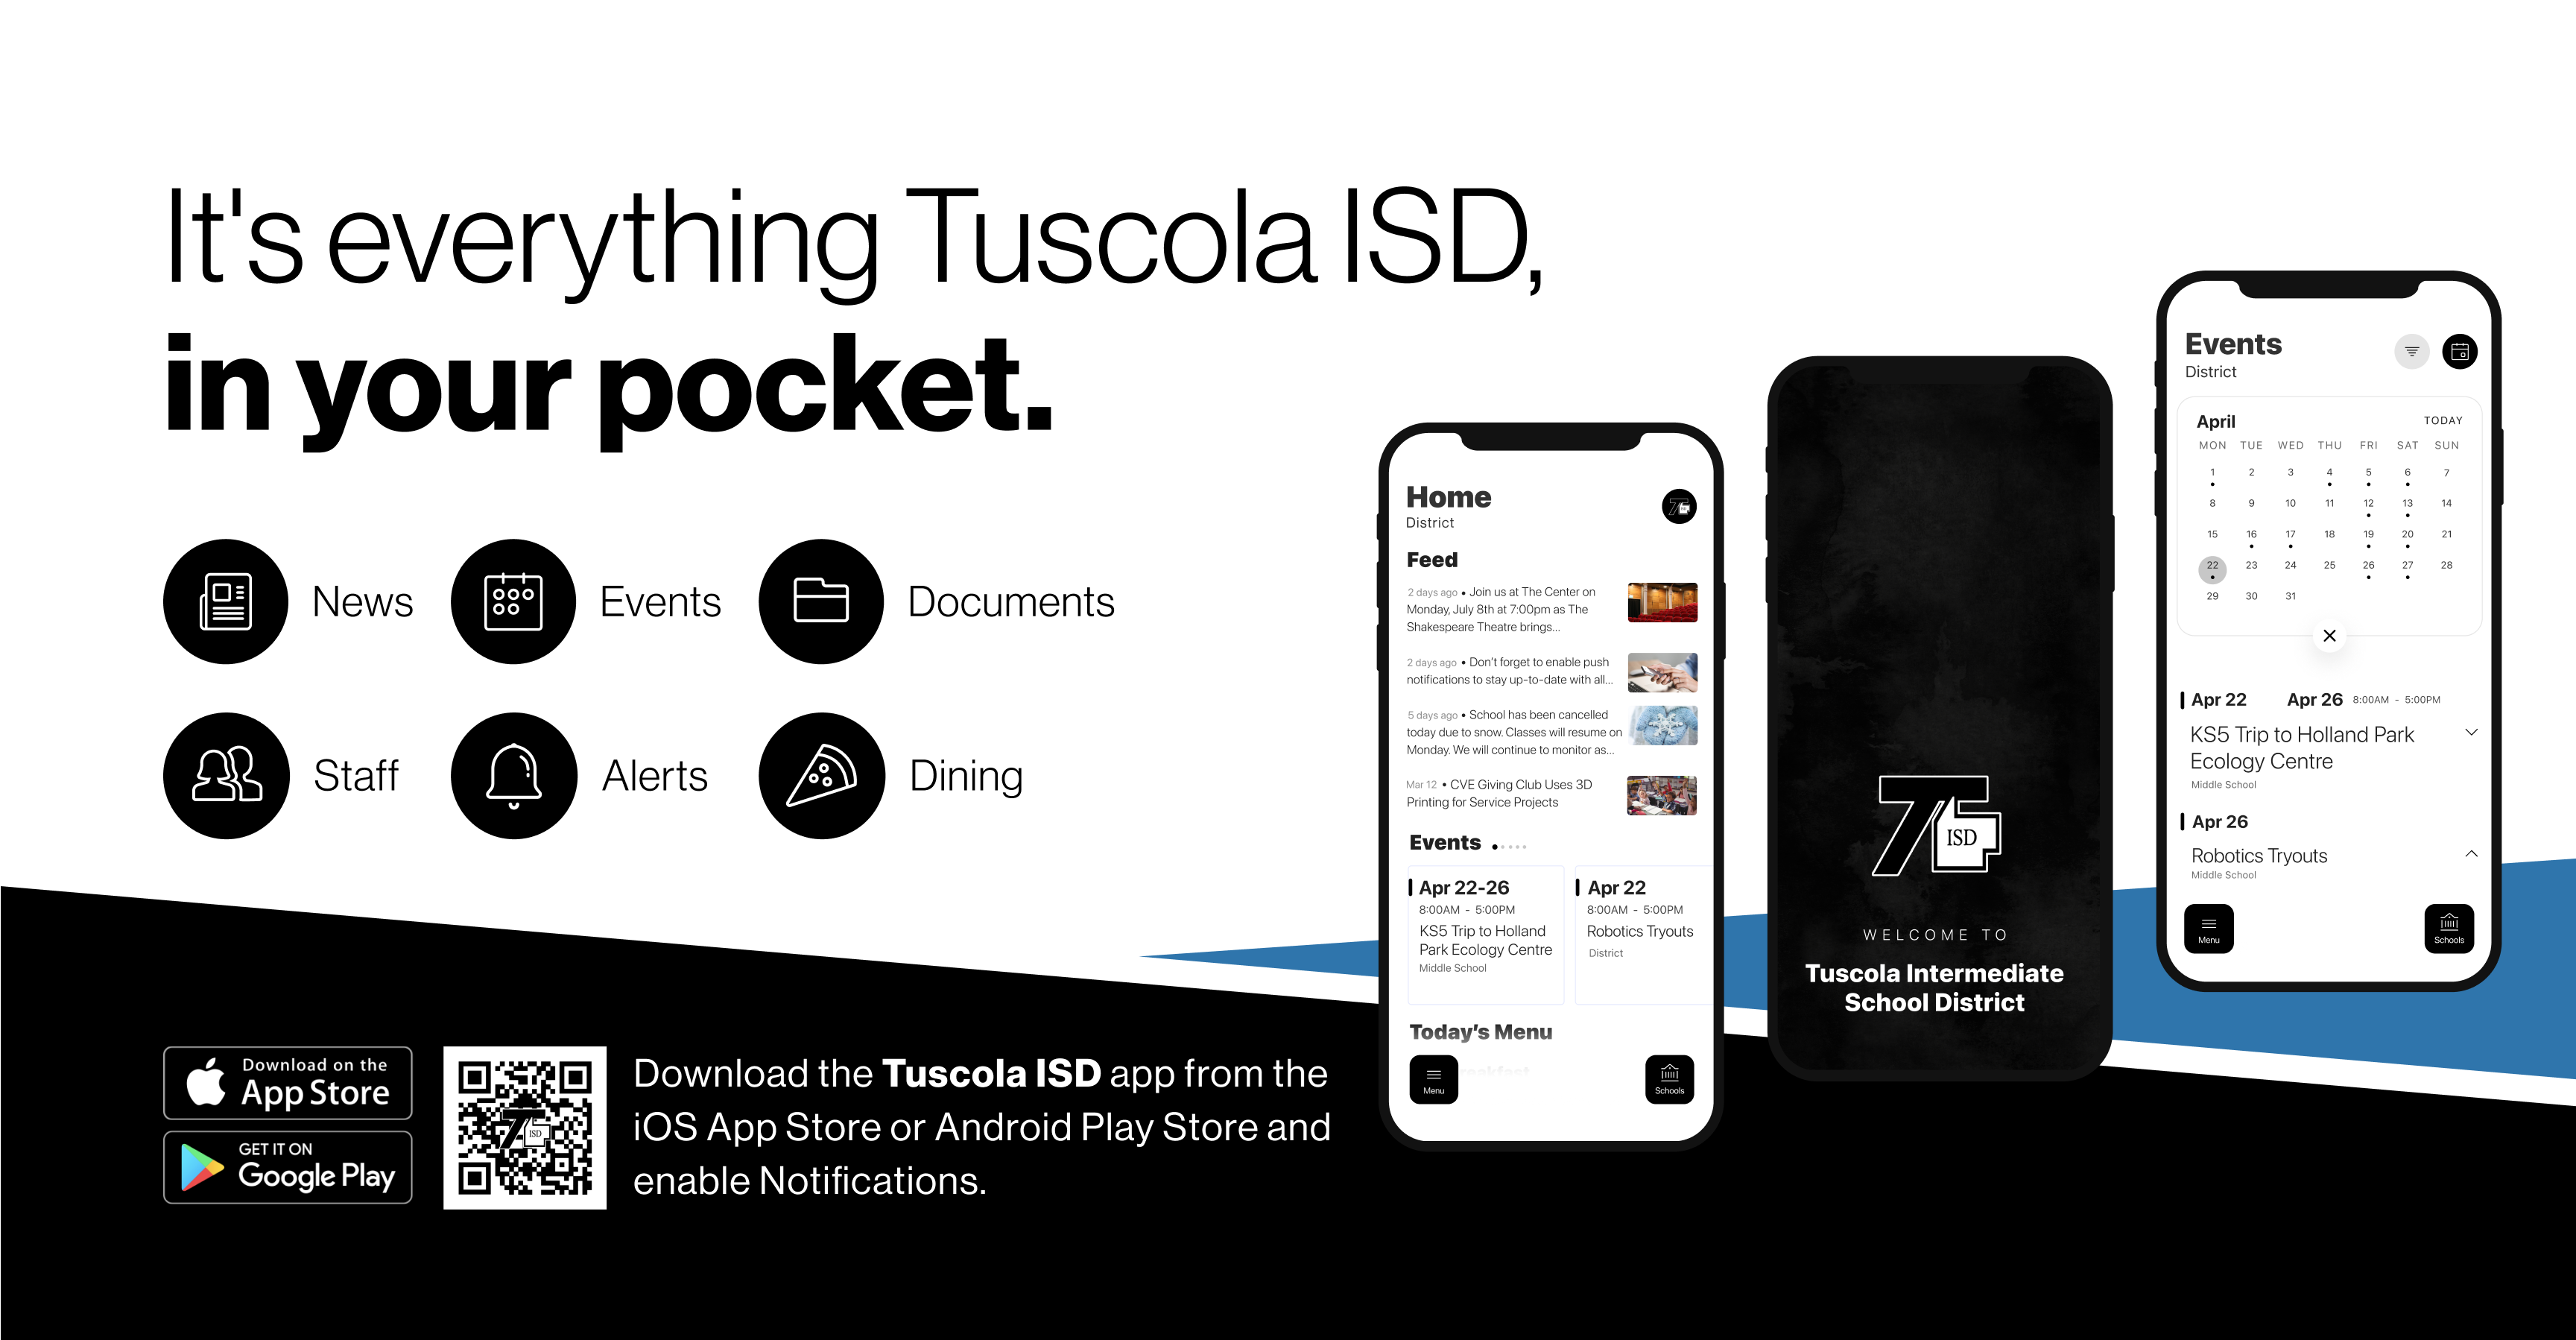 It's everything Tuscola isd in your pocket.